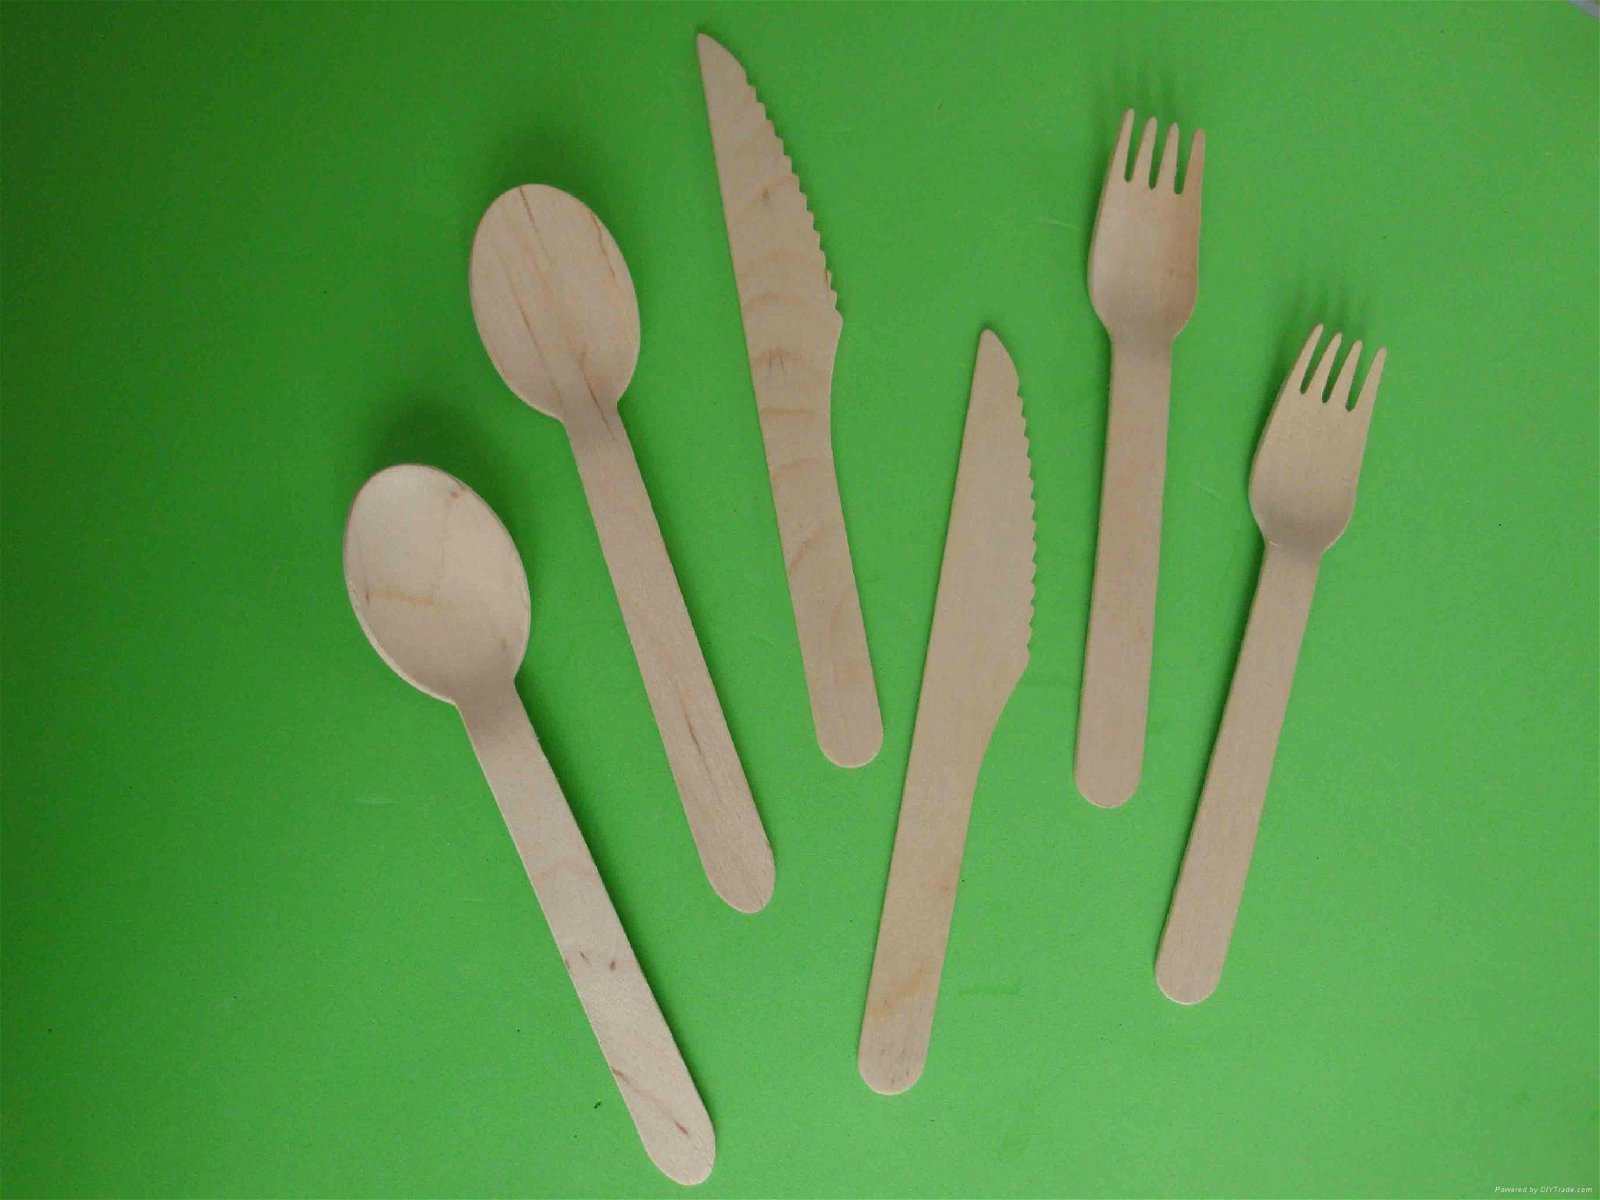 100% birch wood Hot-stamped wooden spoon fork knife 3